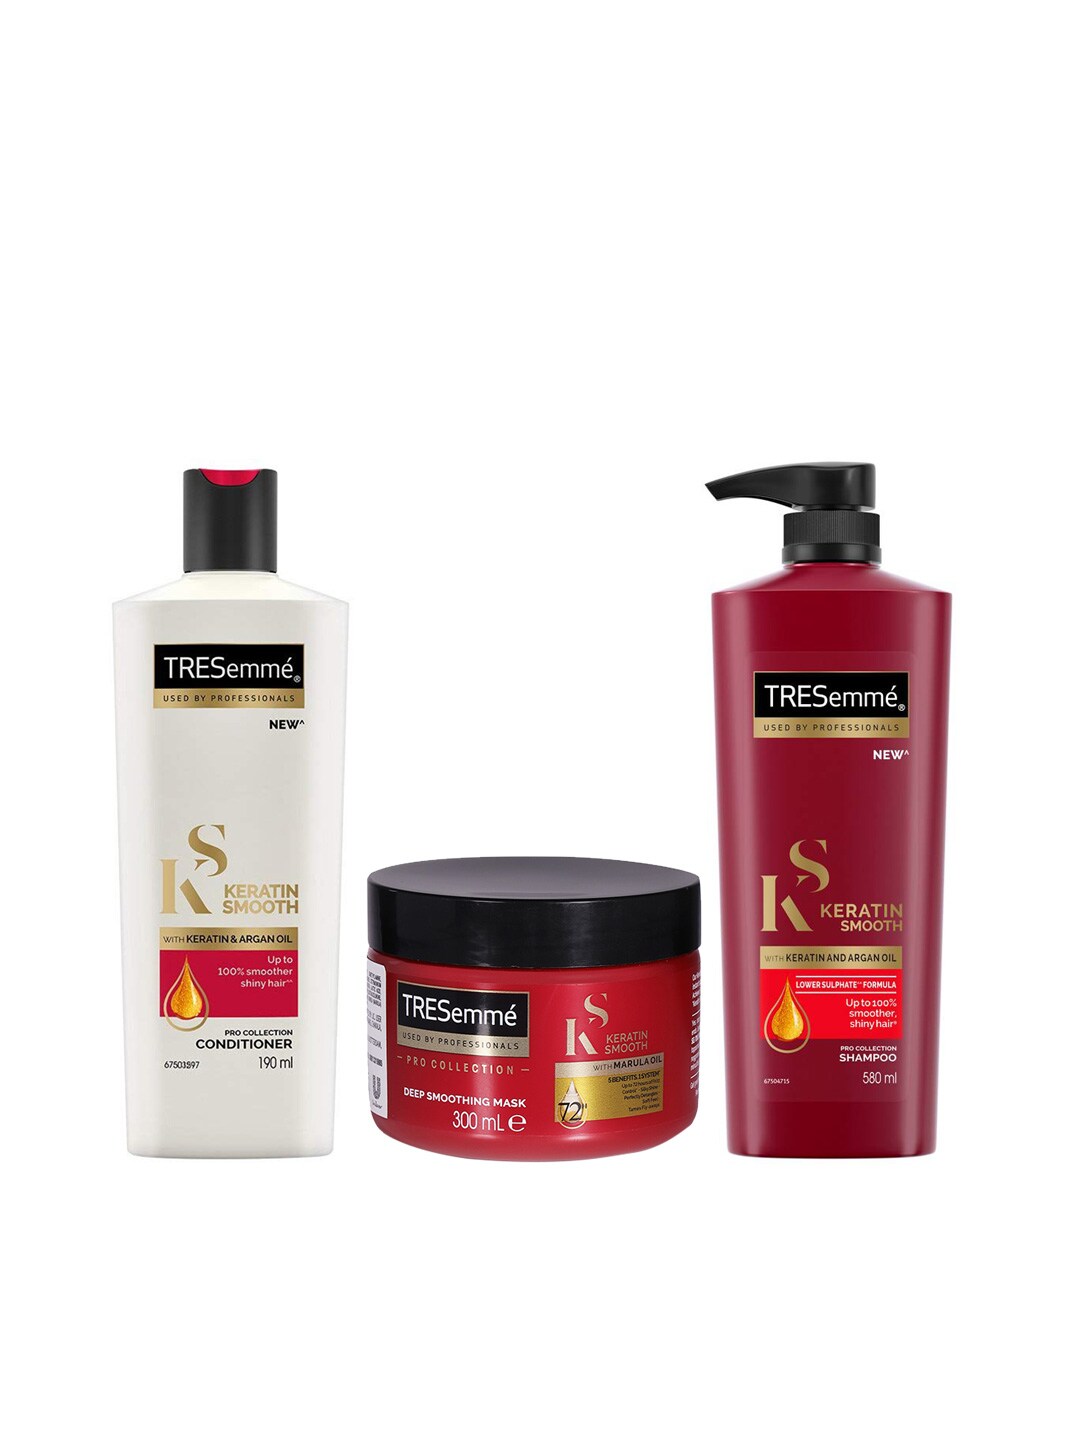 TRESemme Women Set of Shampoo, Mask & Conditioner Price in India